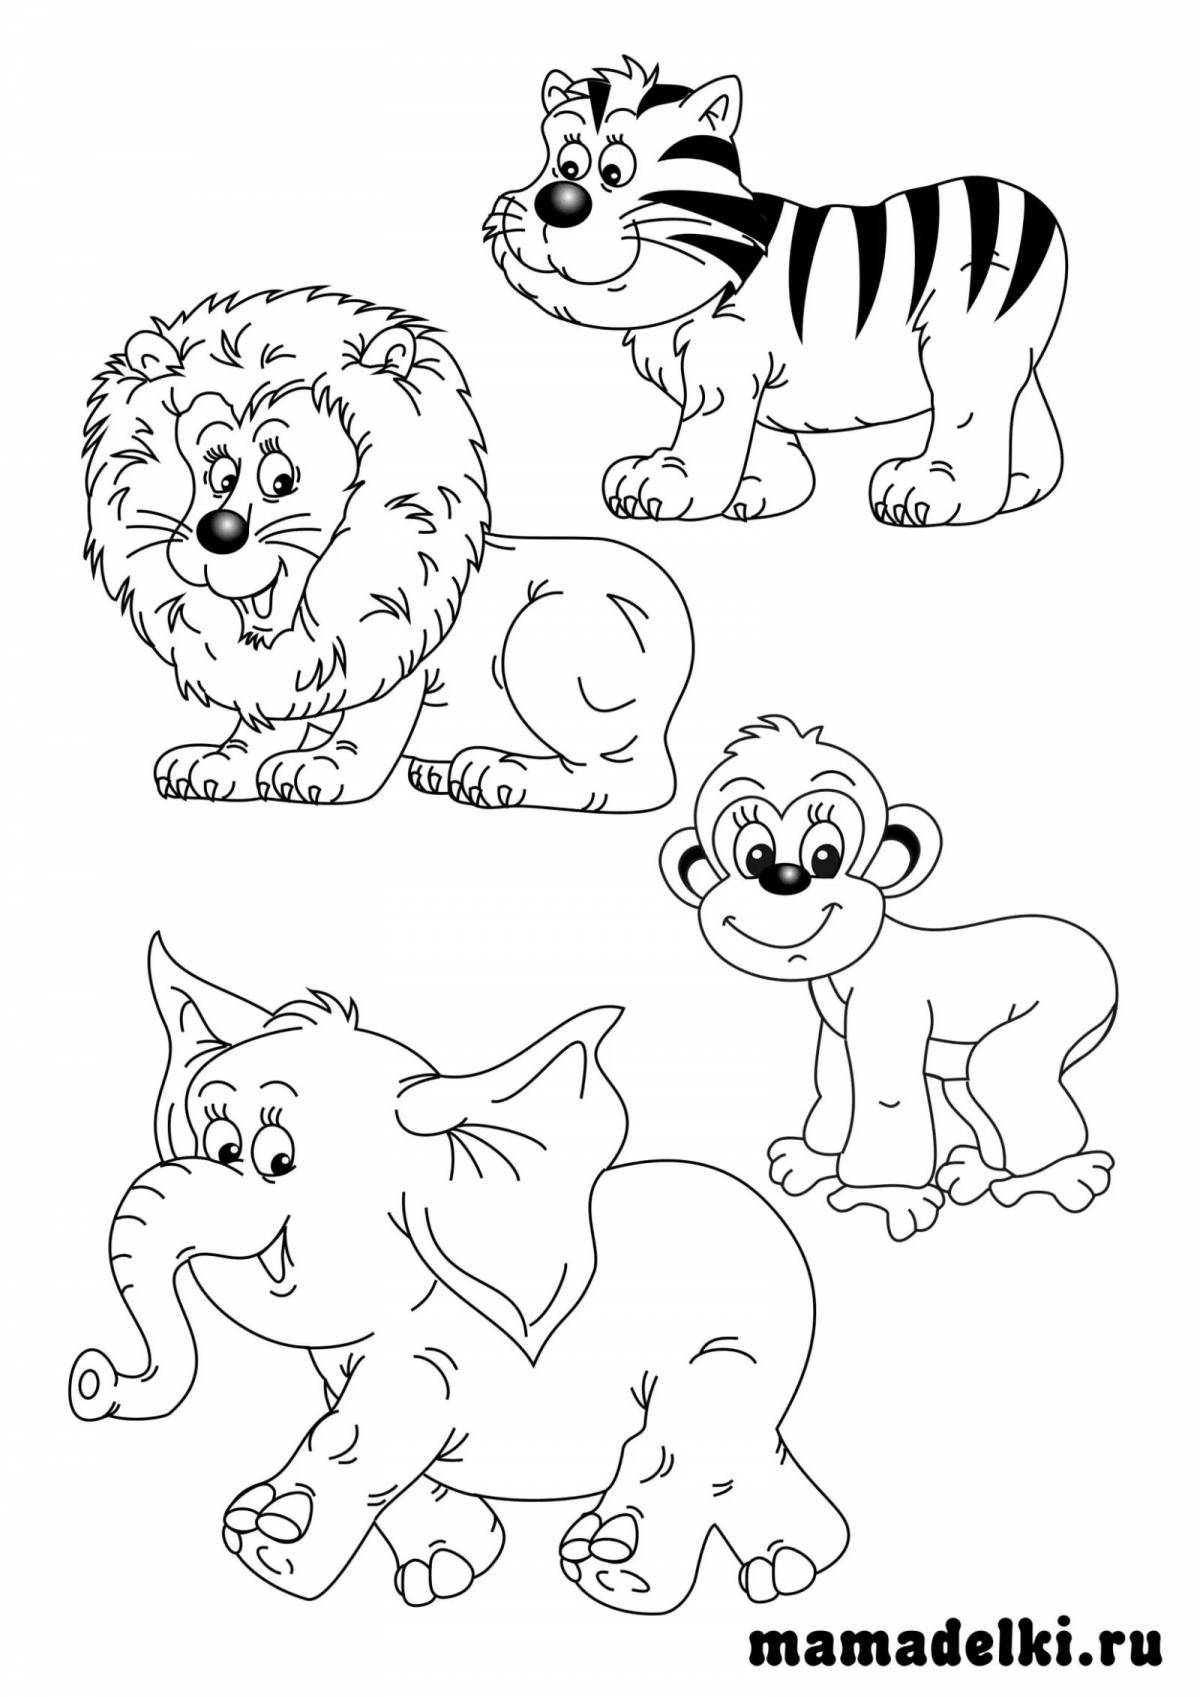 Coloring for kids wild animals 2 3 years old